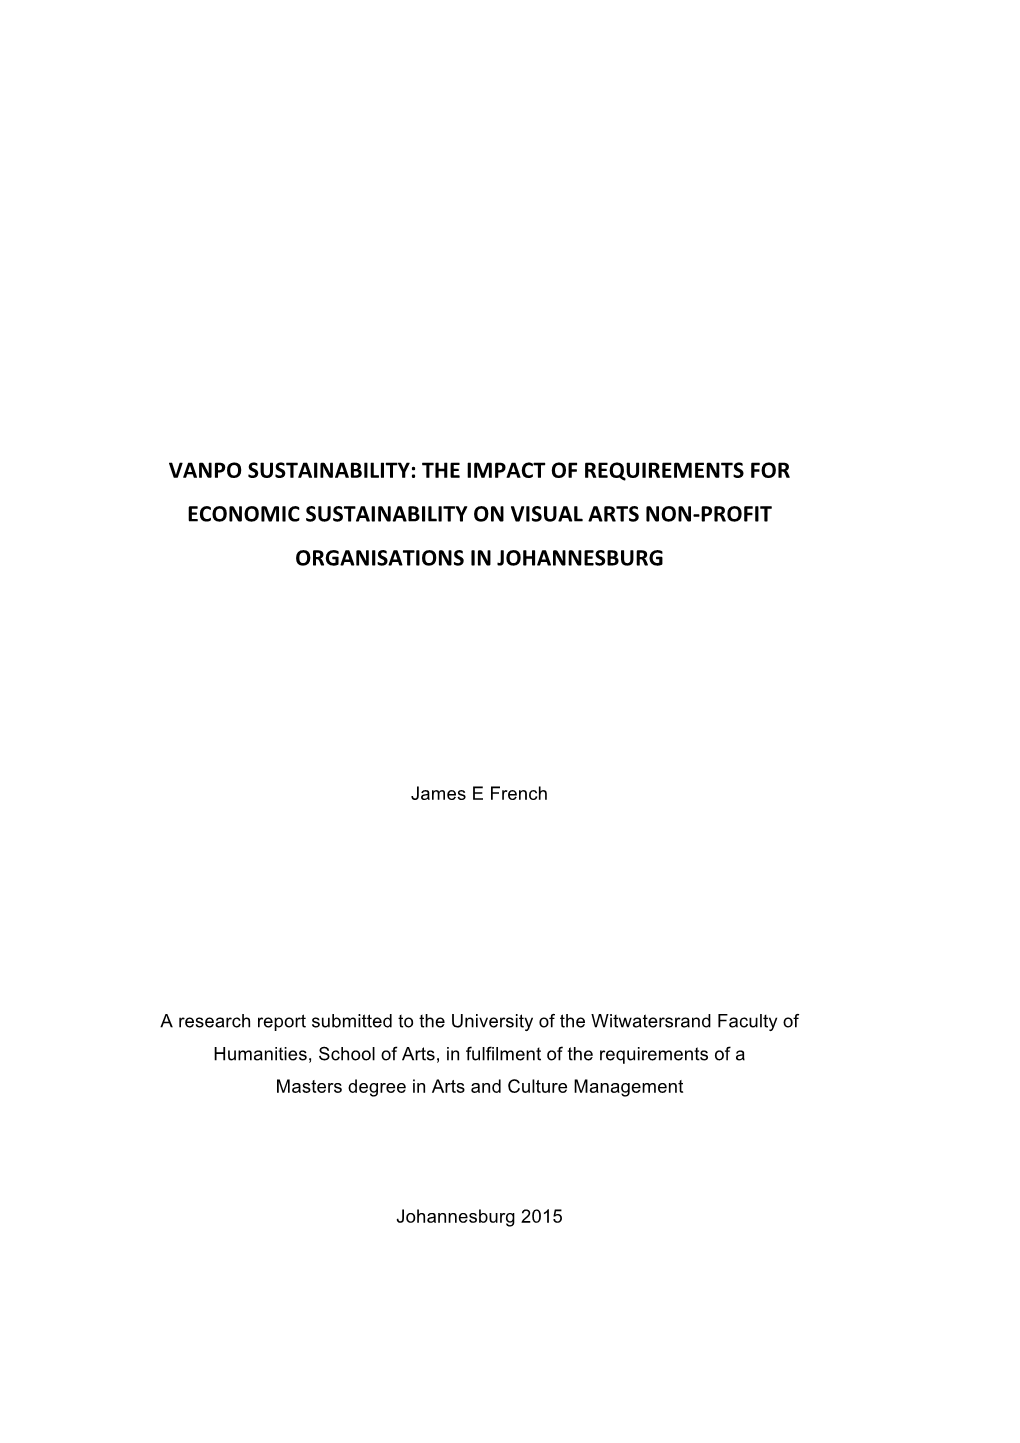 Vanpo Sustainability: the Impact of Requirements for Economic Sustainability on Visual Arts Non-Profit Organisations in Johannesburg